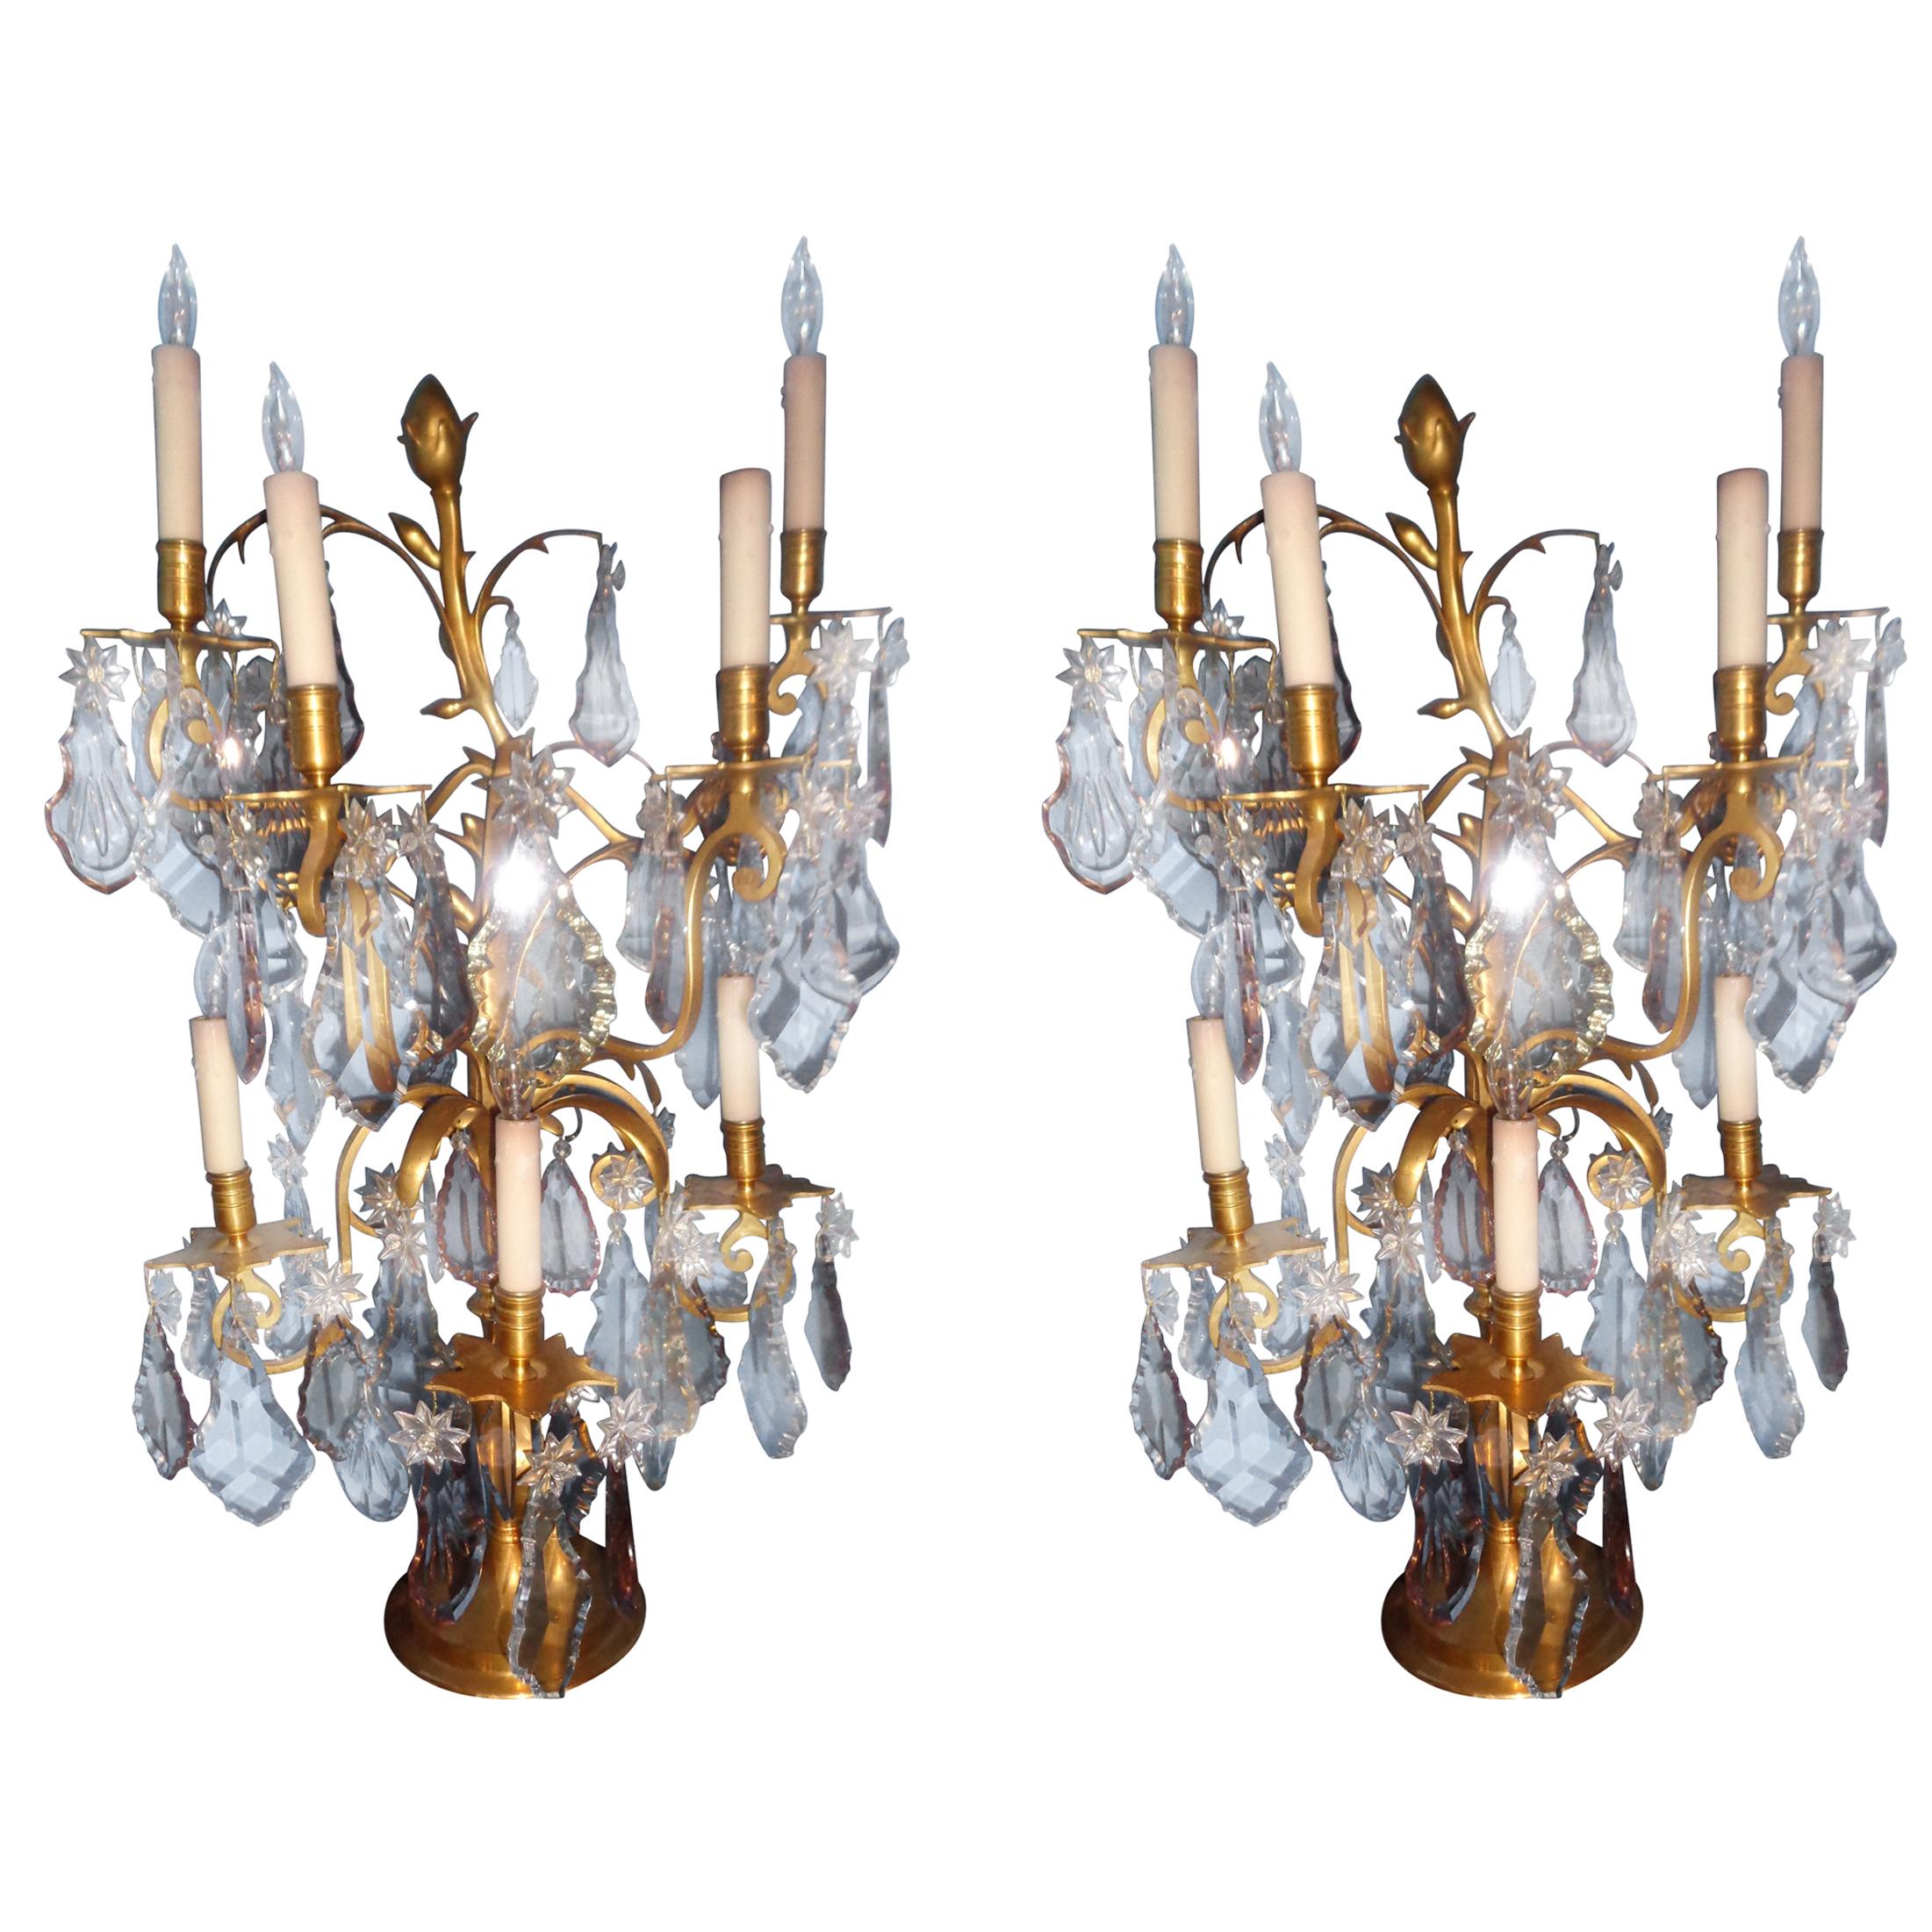 Pair of 19th Century Signed Jansen Girondoles with Colored Baccarat Crystal For Sale